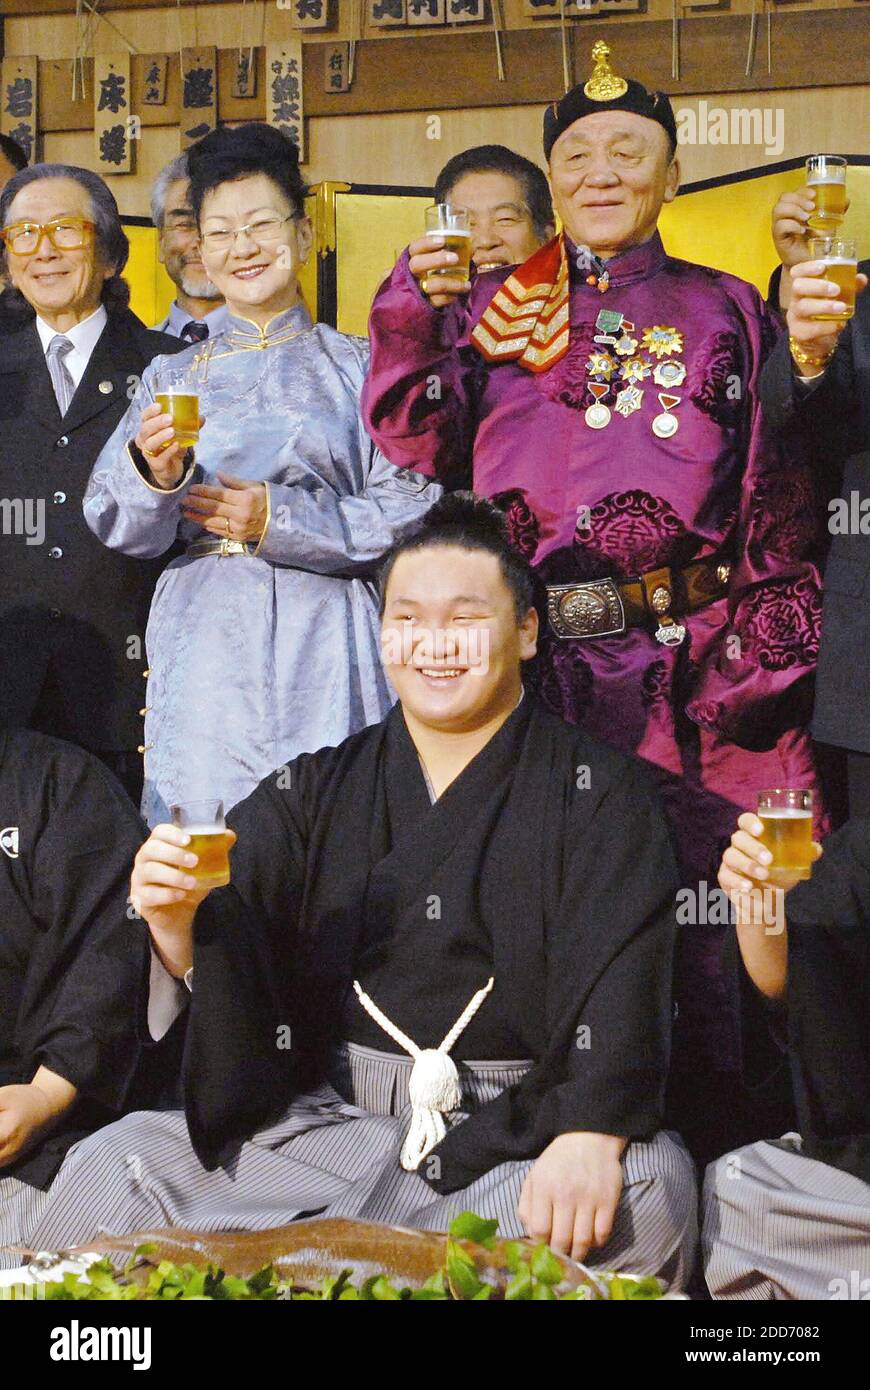 NO FILM, NO VIDEO, NO TV, NO DOCUMENTARY - Mongolian ozeki Hakuho defeats fellow ozeki Chiyotaikai to capture his second straight Emperor's Cup on May 26, 2007 at the Summer Grand Sumo Tournament in Tokyo, Japan. Hakuho, whose real name is Munkhbat Davaajarga, becomes the fourth non-Japanese to reach sumo's highest rank. Photo by Yomiuri Shimbun/MCT/Cameleon/ABACAPRESS.COM Stock Photo